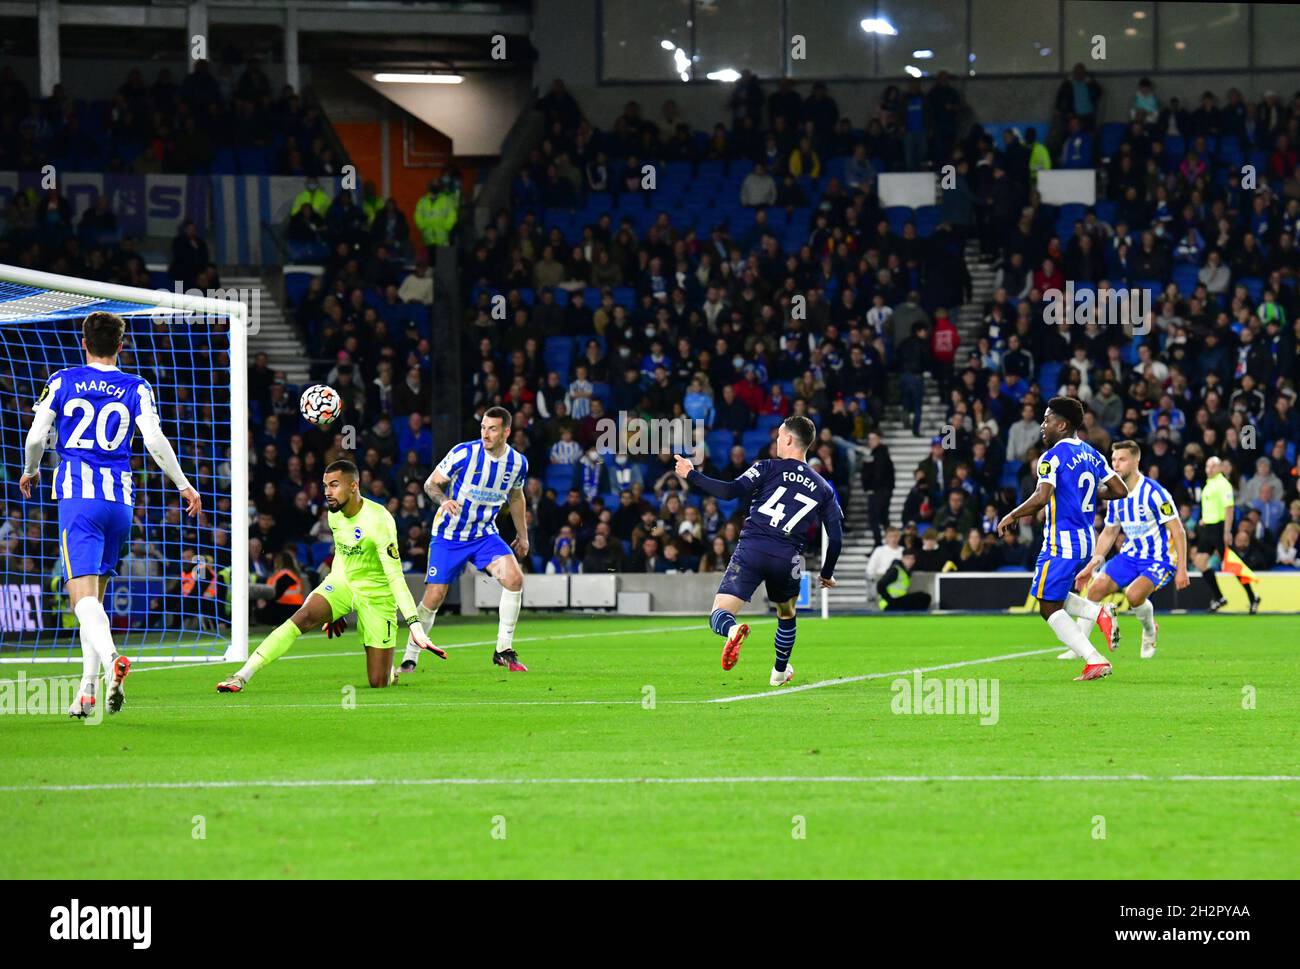 Brighton, UK. 23rd Oct, 2021. Robert Sanchez Goalkeeper of Brighton and Hove Albion sees clear the attempt on goal from Phil Foden of Manchester City during the Premier League match between Brighton & Hove Albion and Manchester City at The Amex on October 23rd 2021 in Brighton, England. (Photo by Jeff Mood/phcimages.com) Credit: PHC Images/Alamy Live News Stock Photo